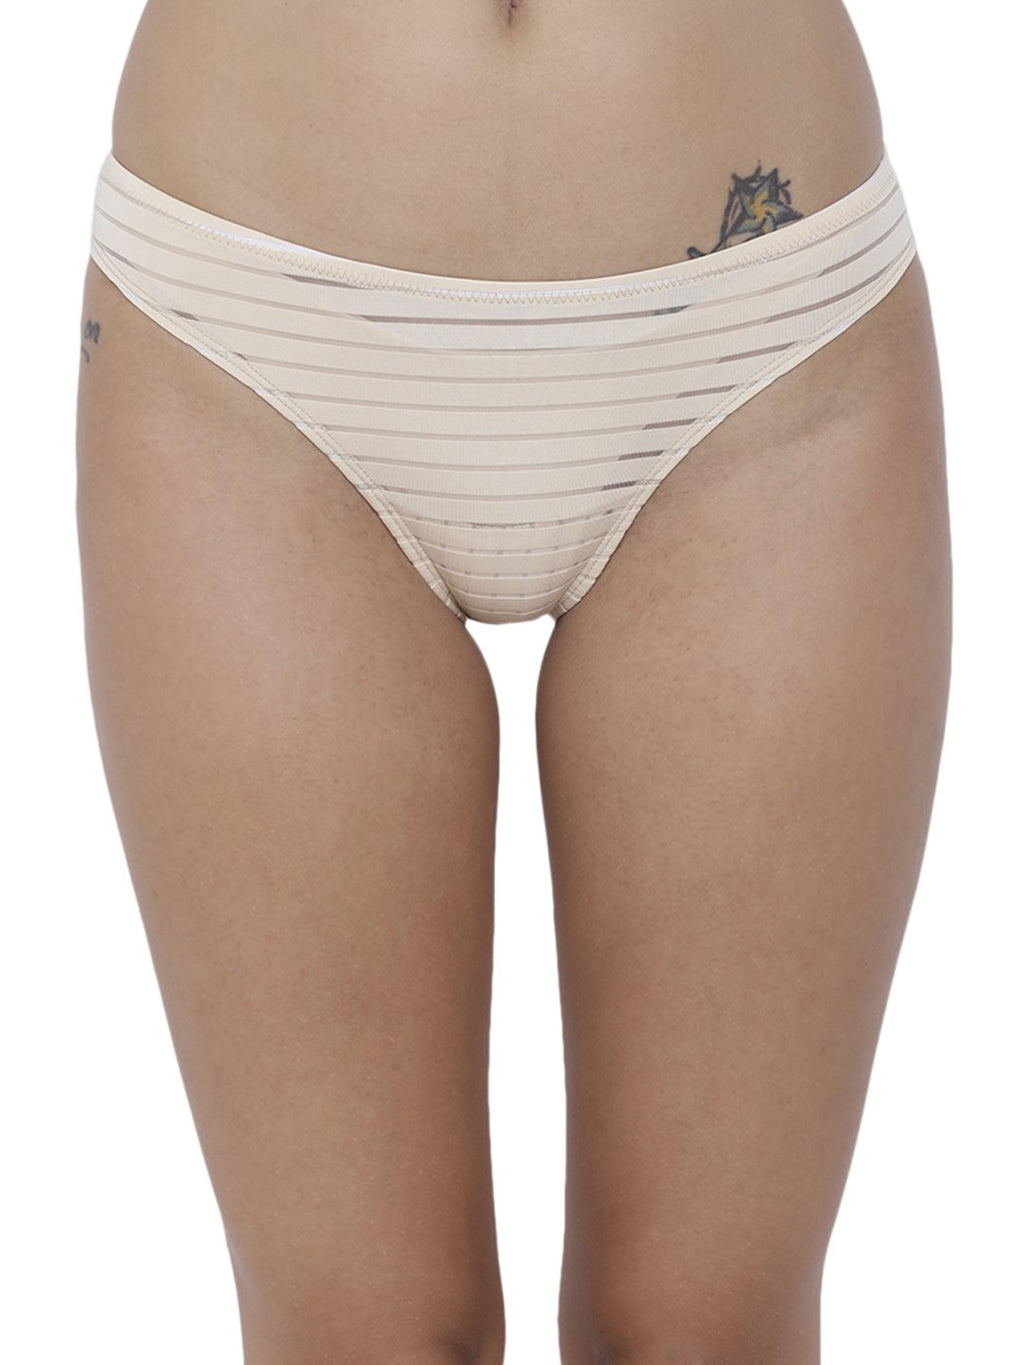 Dulce Candy Brief Panty at La Intimo